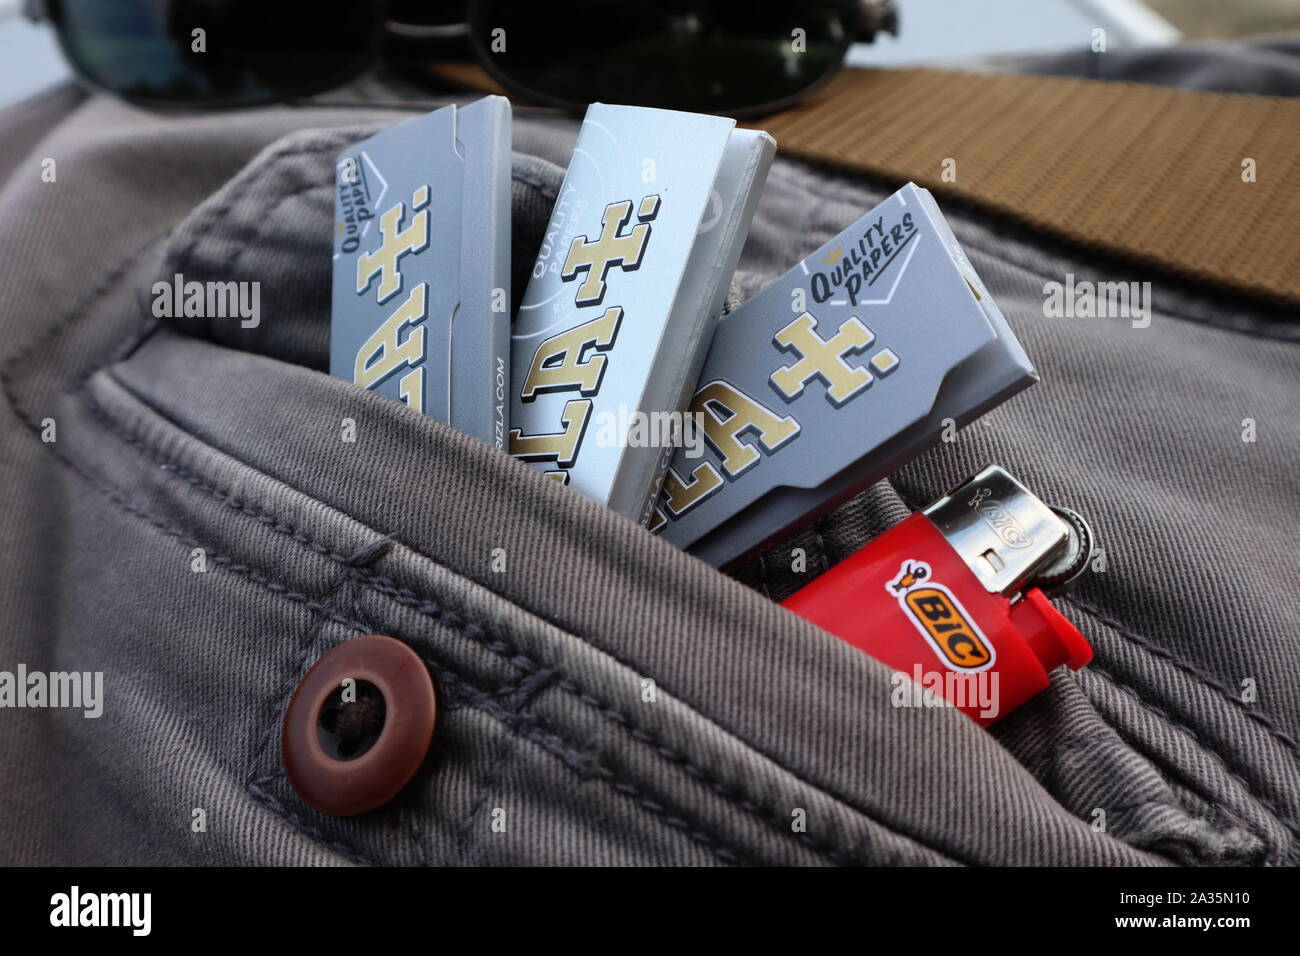 Packets of Rizla cigarette rolling paper with Bic mini lighter in back pocket of grey denim pants Stock Photo